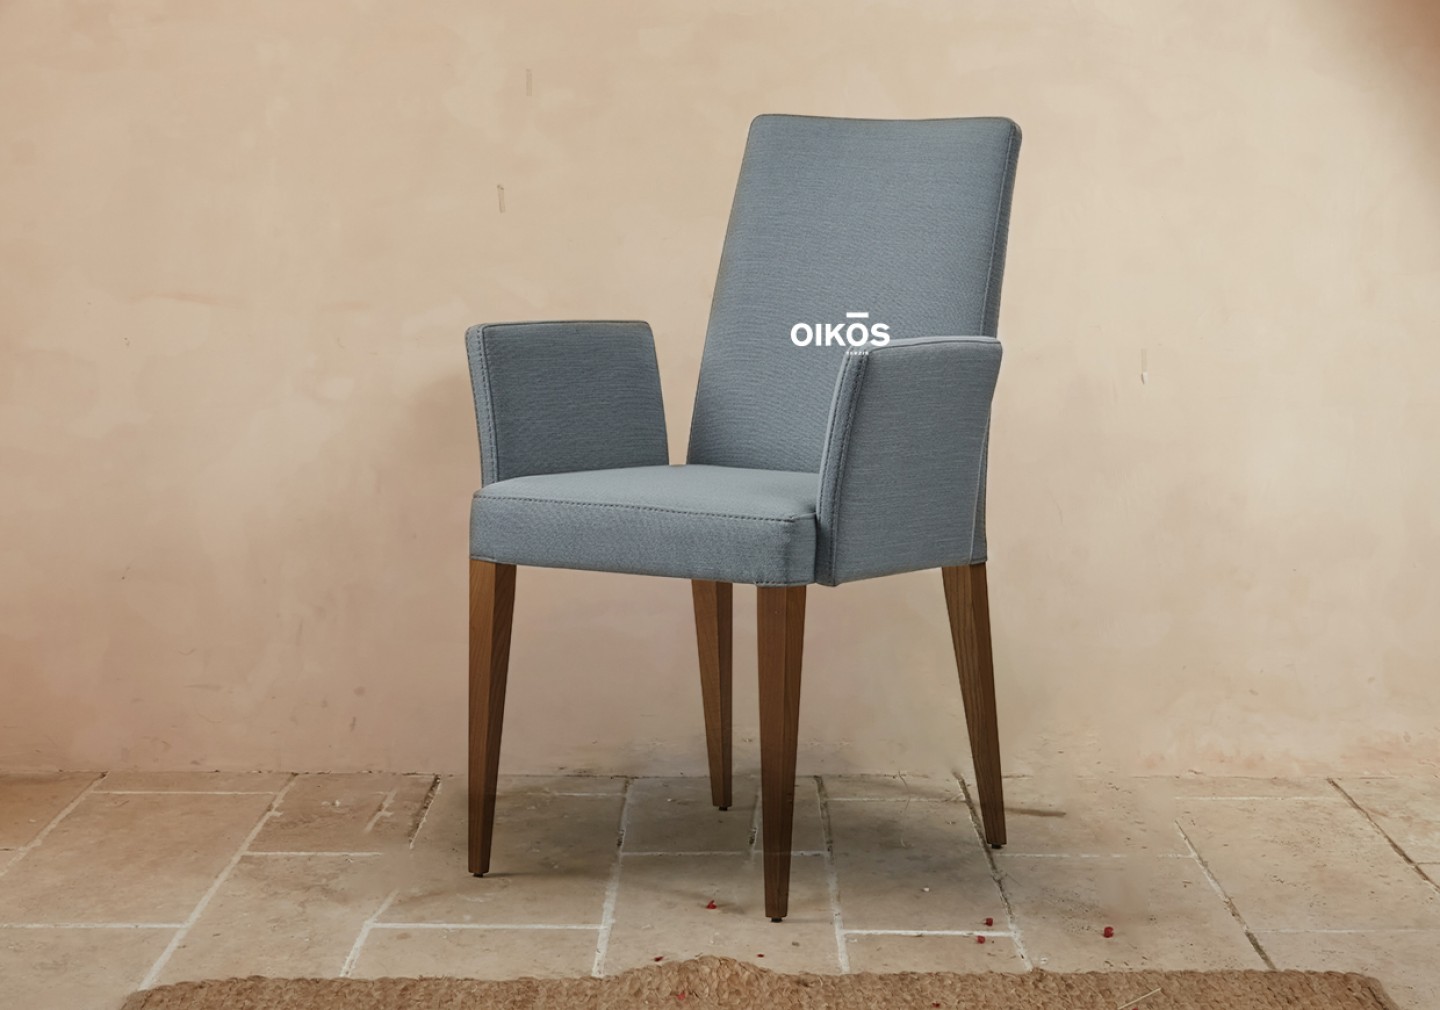 THE LEON DINING CHAIR